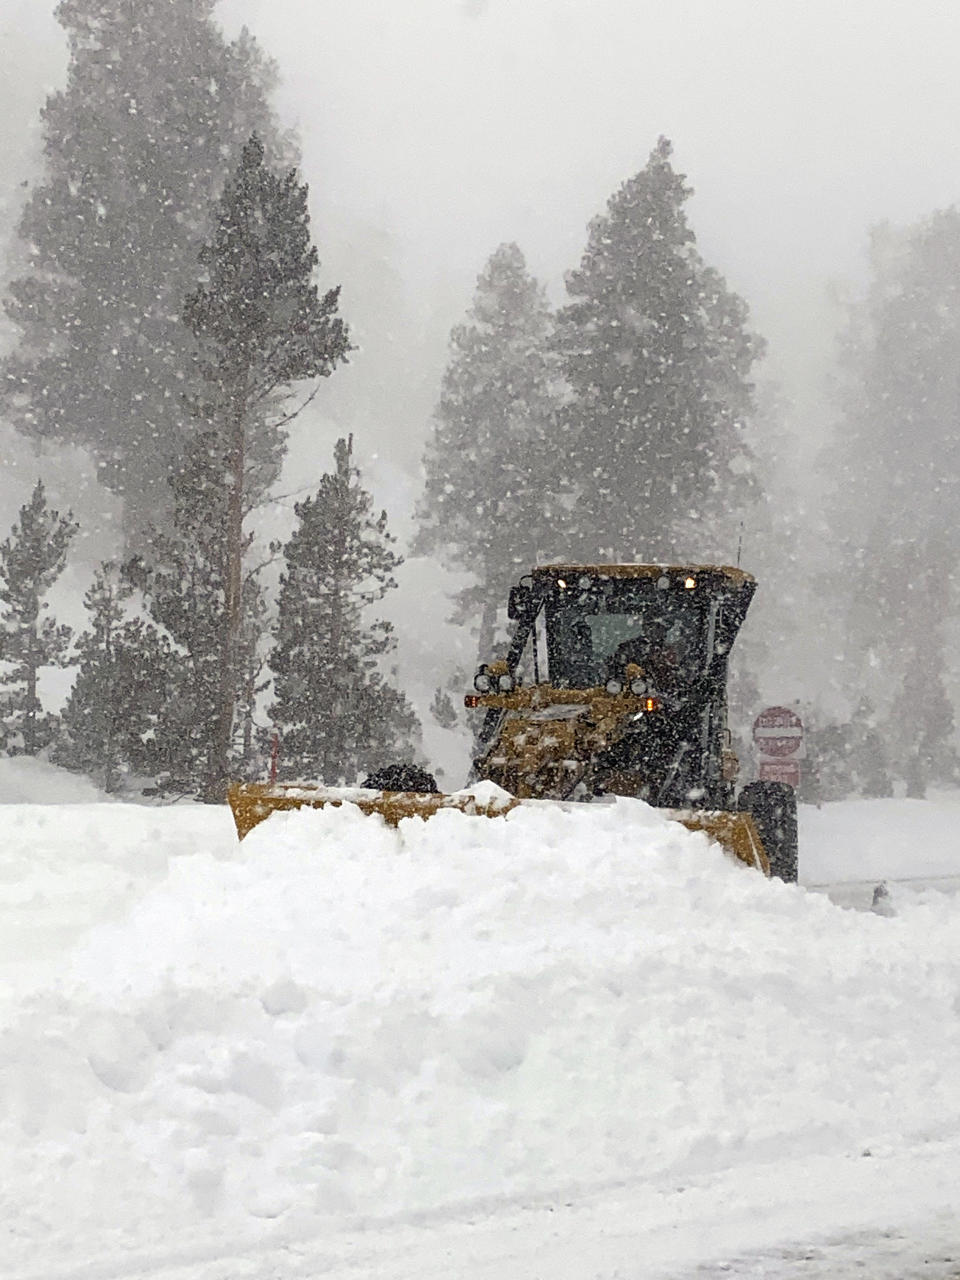 In this photo provided by Caltrans District 9, an earth mover clears heavy snow that fell along a closed U.S. Hwy 395, at Wilson Butte, in Mono County, Calif. on Wednesday, Jan. 27, 2021. An atmospheric river storm pumped drenching rains into the heart of California on Thursday as blizzard conditions buried the Sierra Nevada in snow. (Greg Miller/Caltrans District 9 via AP)